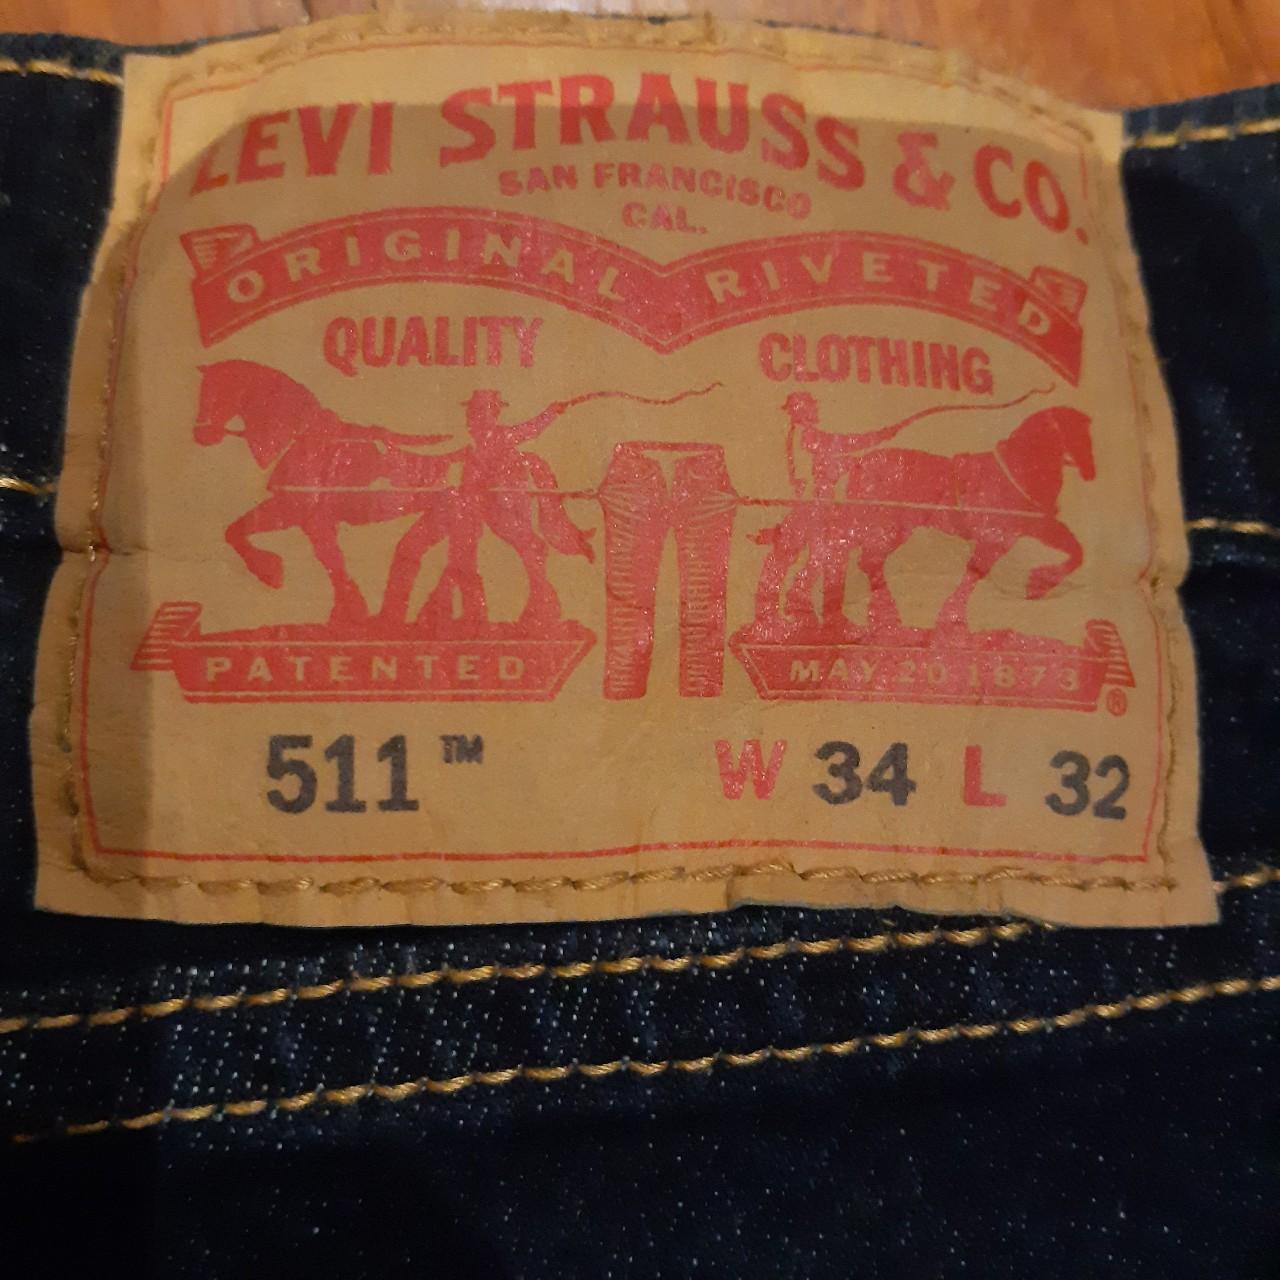 Levi's 511 Brand spanking new, tags removed however. - Depop